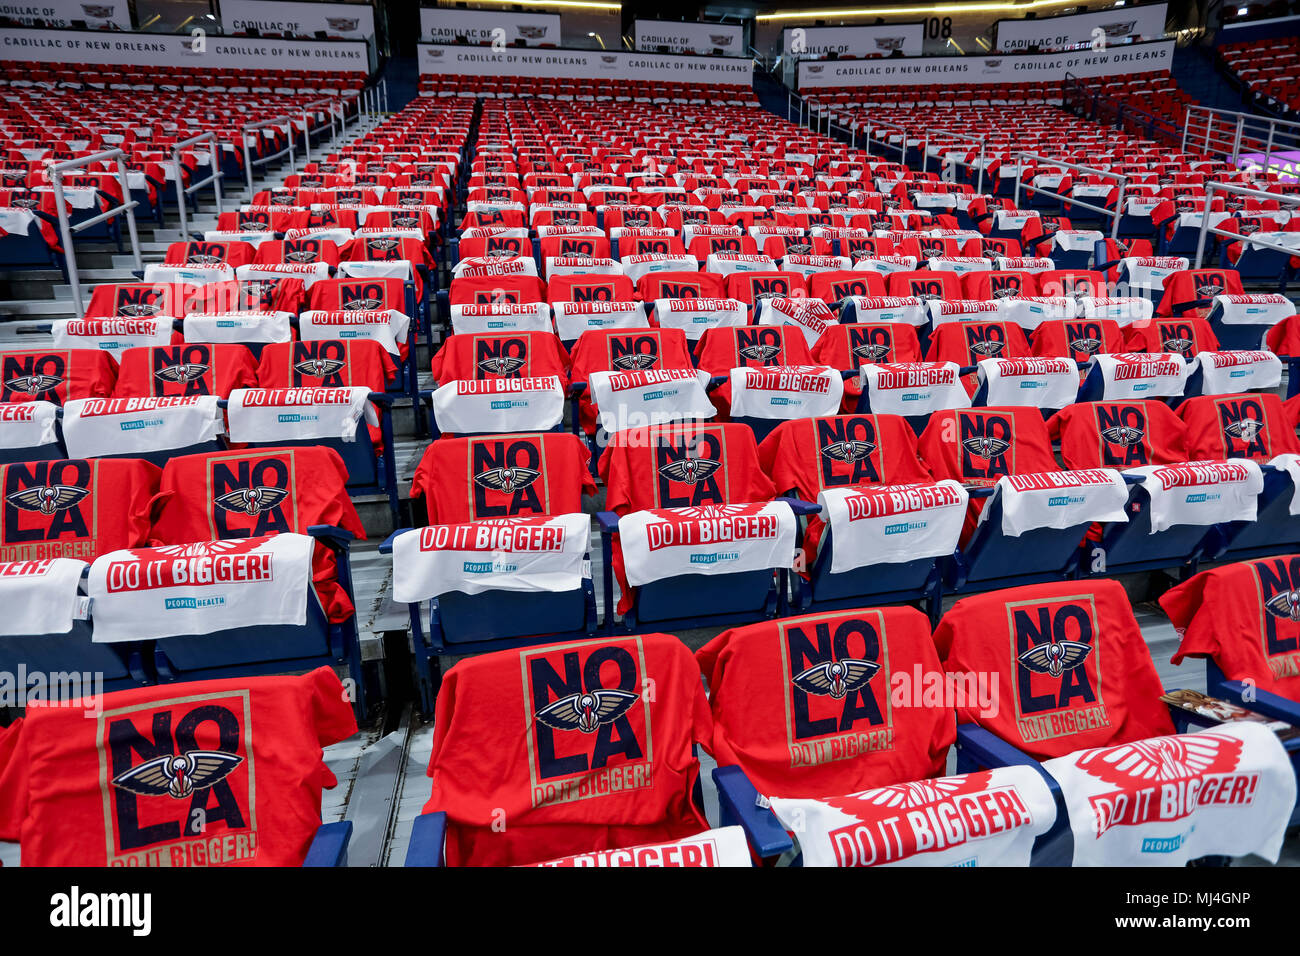 New Orleans, LA, USA. 04th May, 2018. New Orleans Pelicans seats before the  game at the Smoothie King Center in New Orleans, LA. Stephen Lew/CSM/Alamy  Live News Stock Photo - Alamy